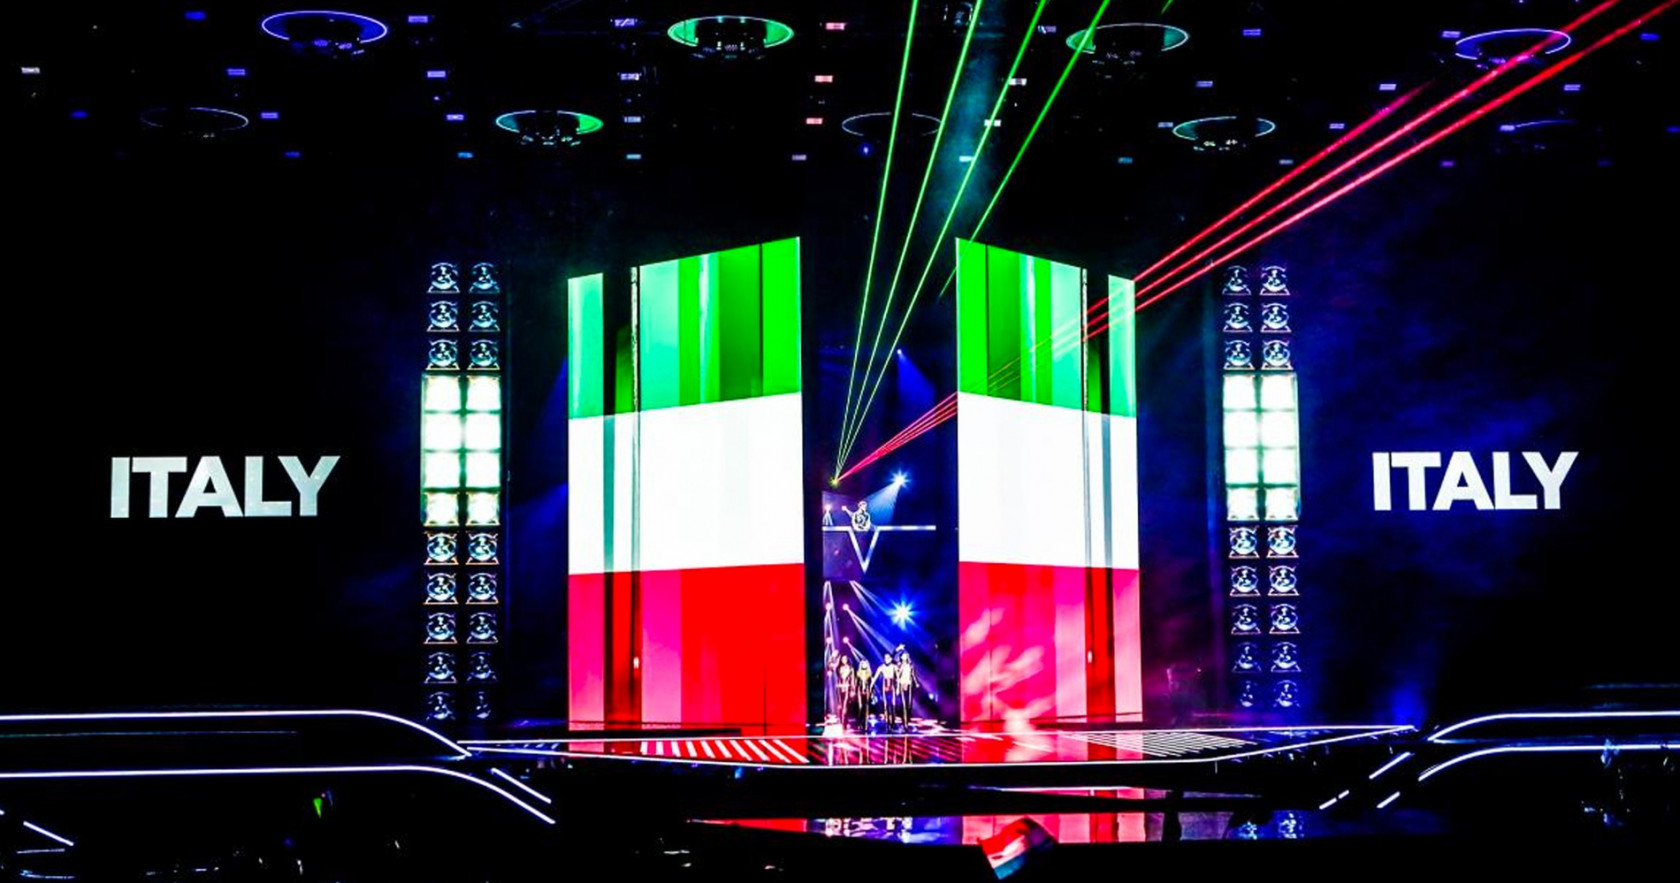 Eurovision 2022: Preliminary rehearsals and show schedule announced today